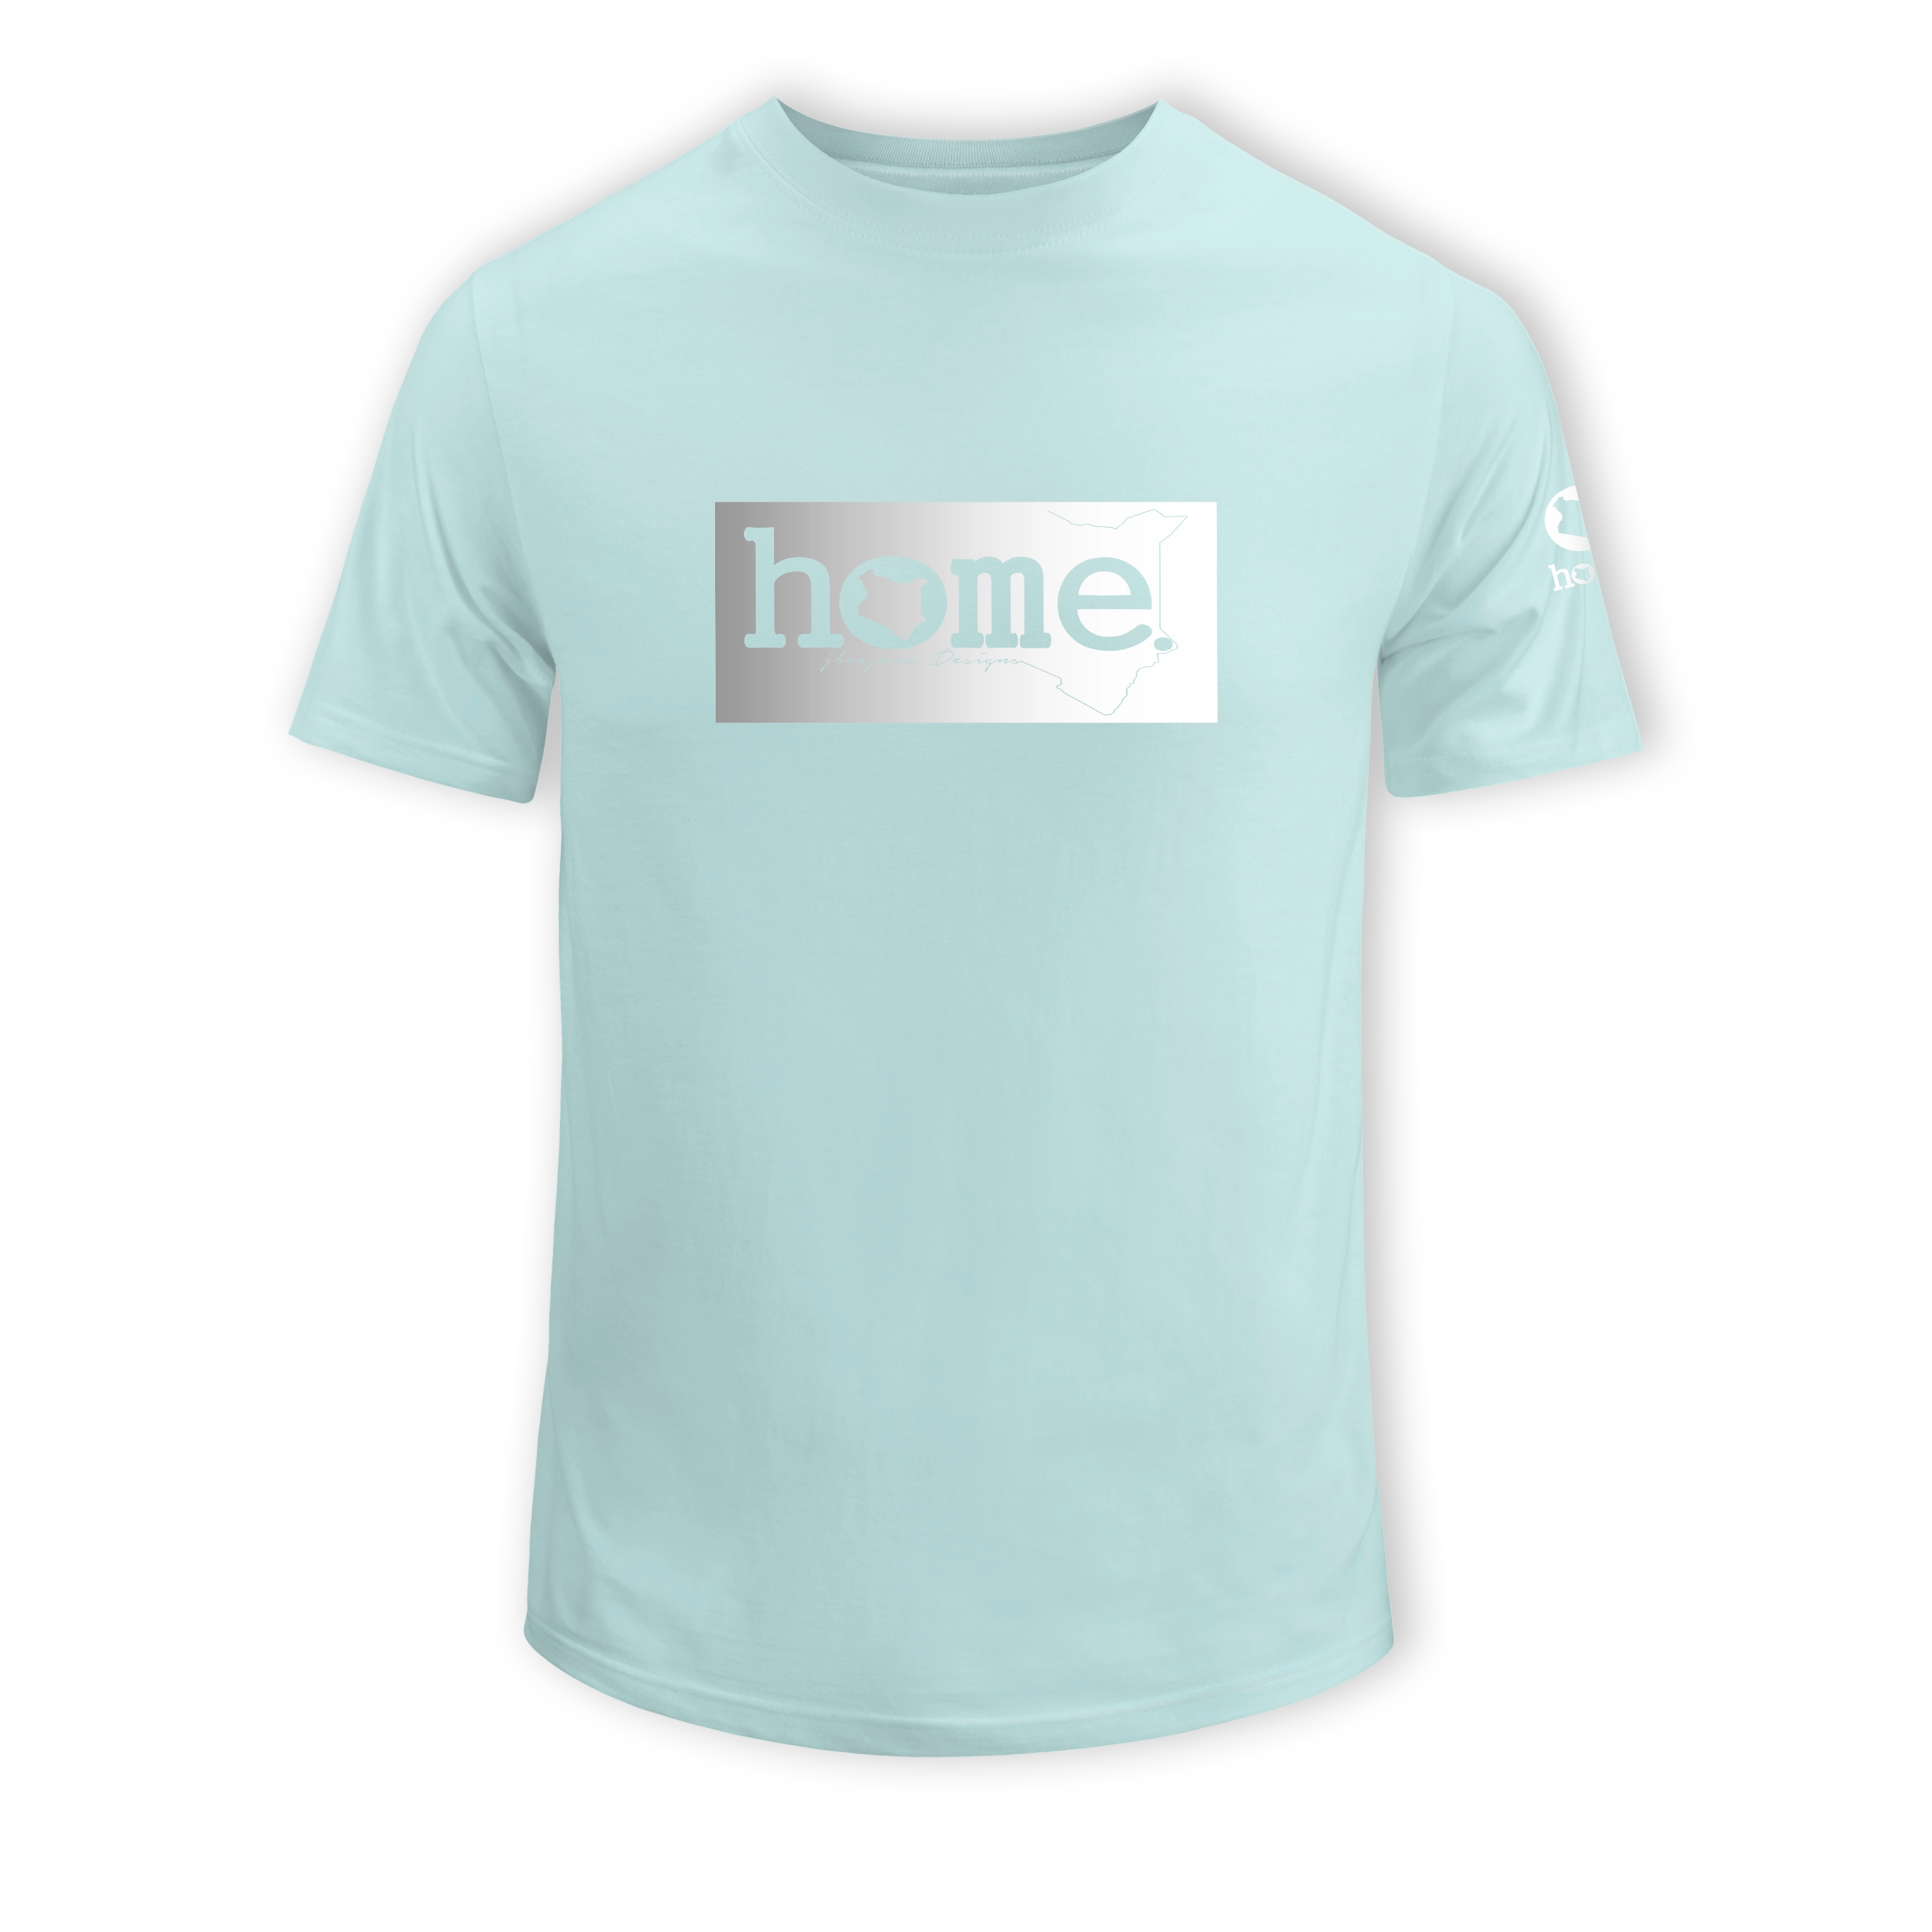 home_254 SHORT-SLEEVED MISTY BLUE T-SHIRT WITH A SIILVER CLASSIC PRINT – COTTON PLUS FABRIC